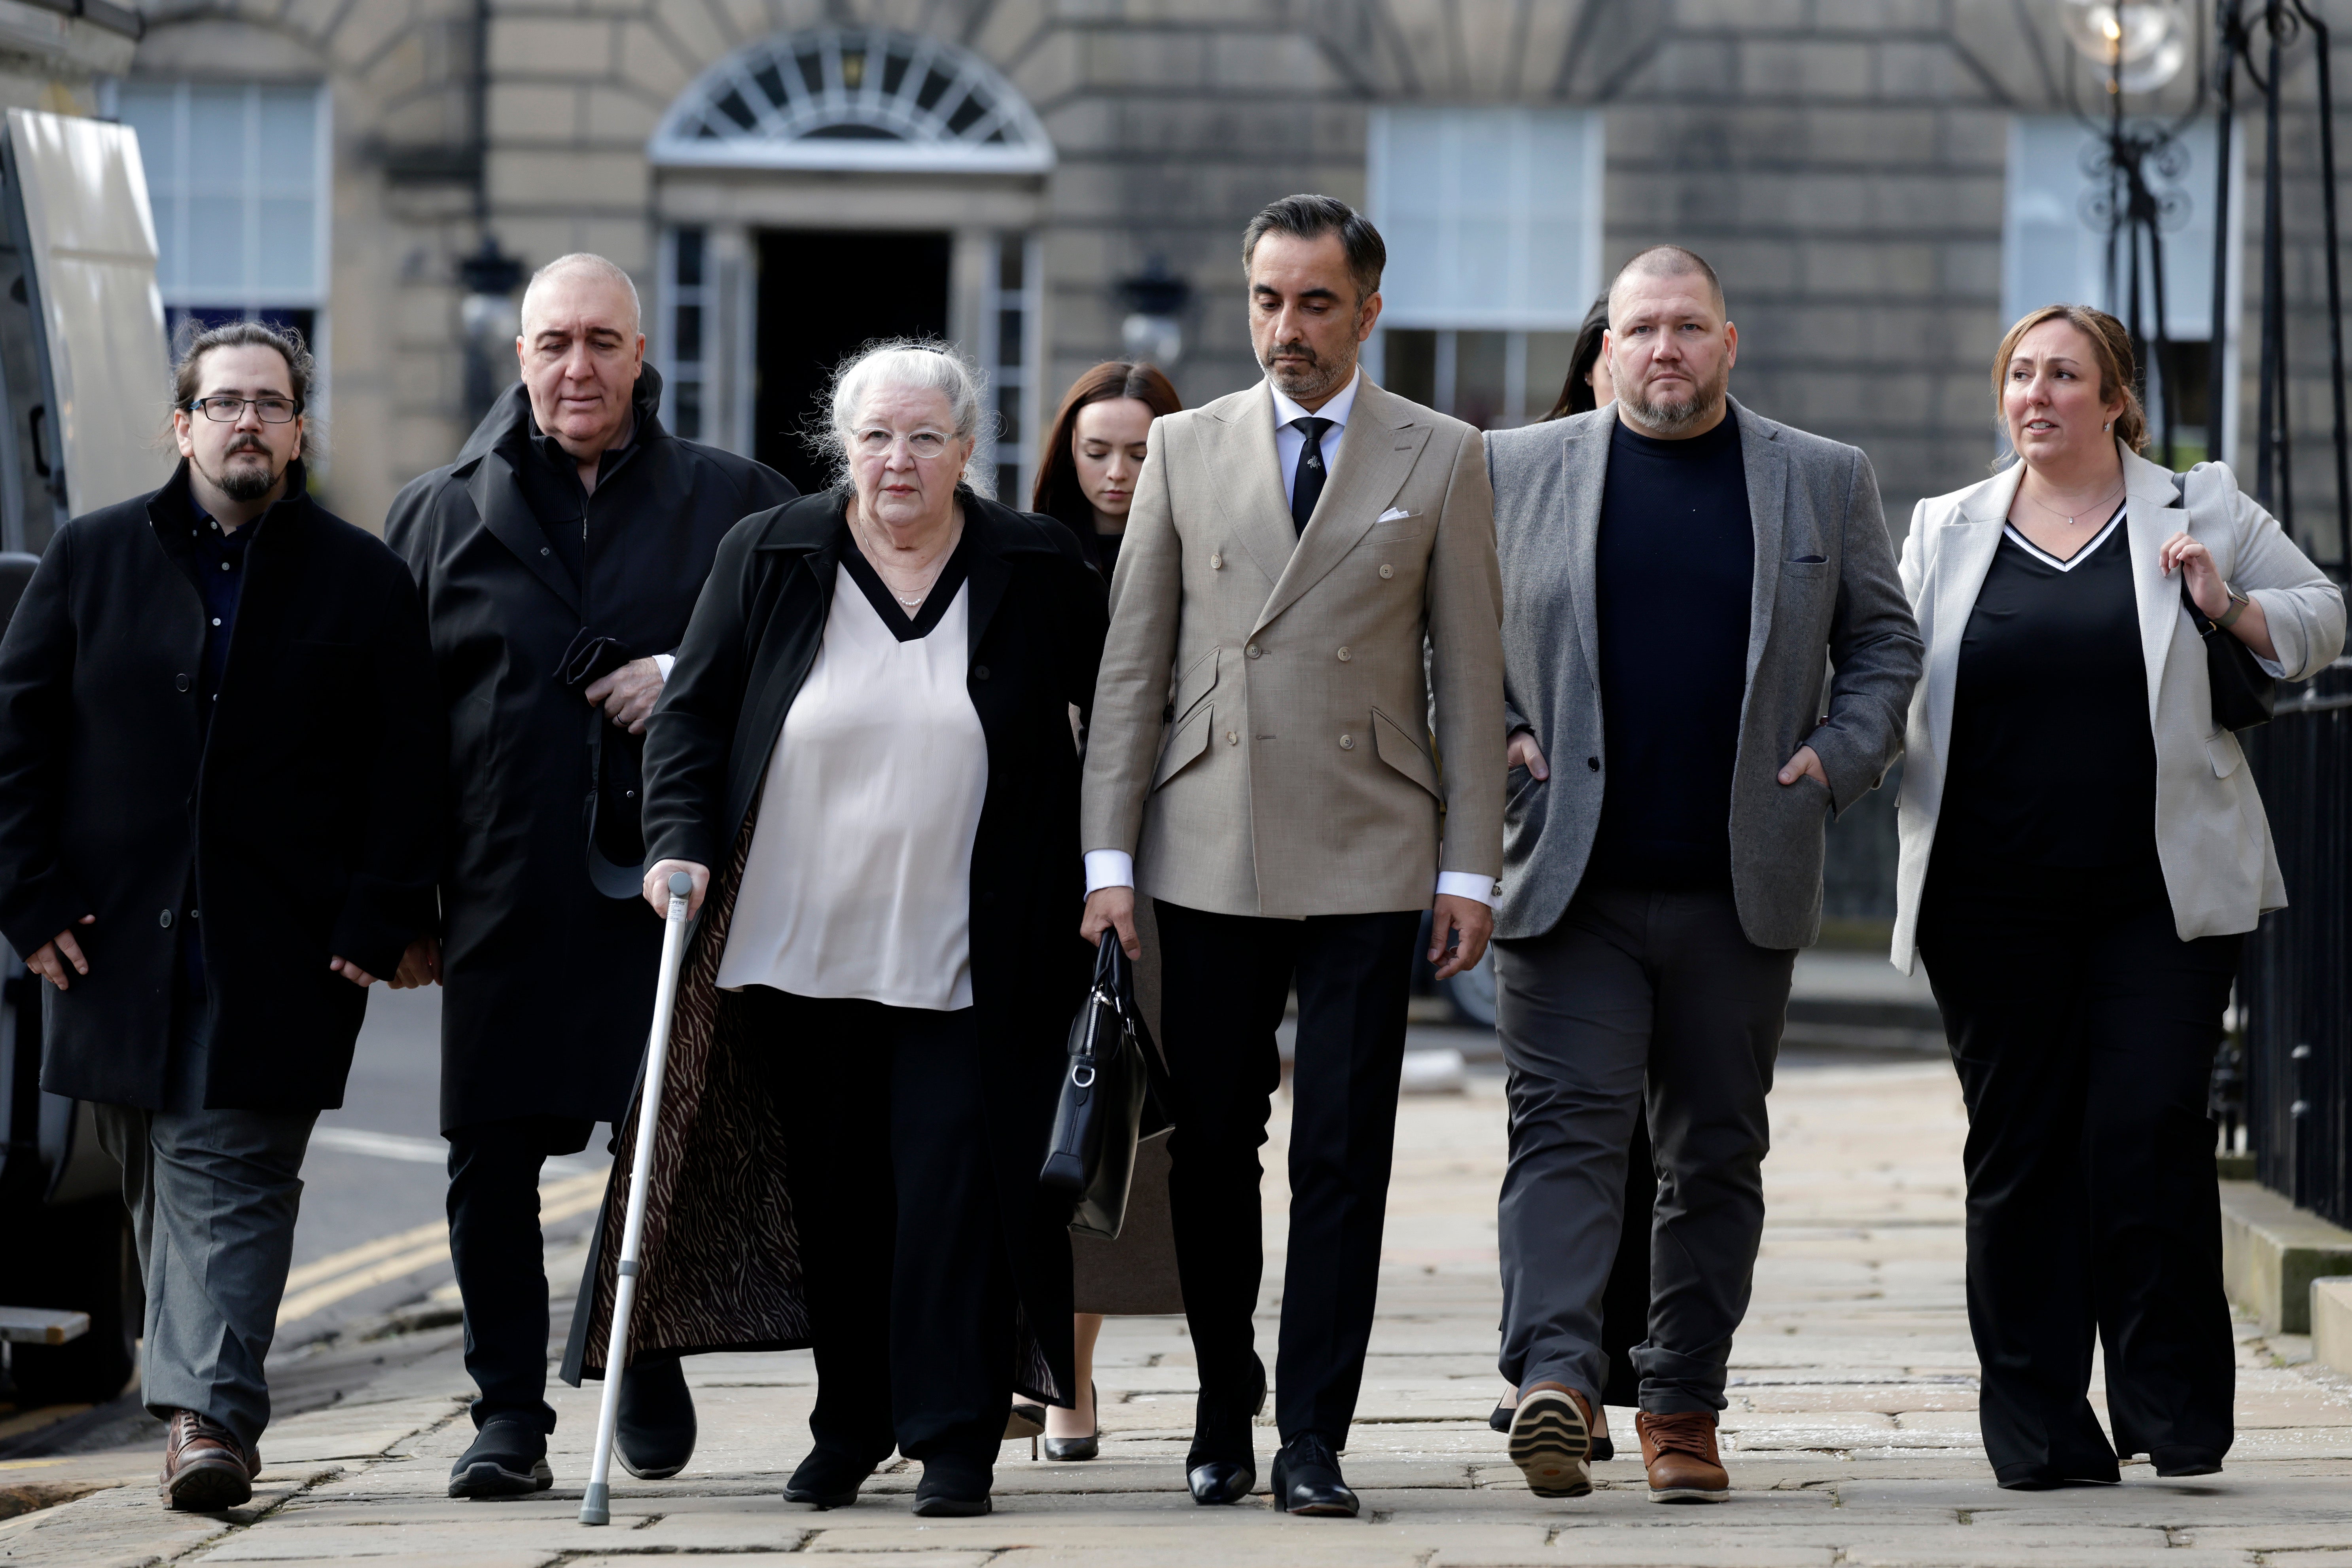 Emma Caldwell’s mother Margaret Caldwell along with her family and their lawyer, Aamer Anwar arrive at Bute House for a meeting with First Minister Humza Yousaf on Tuesday